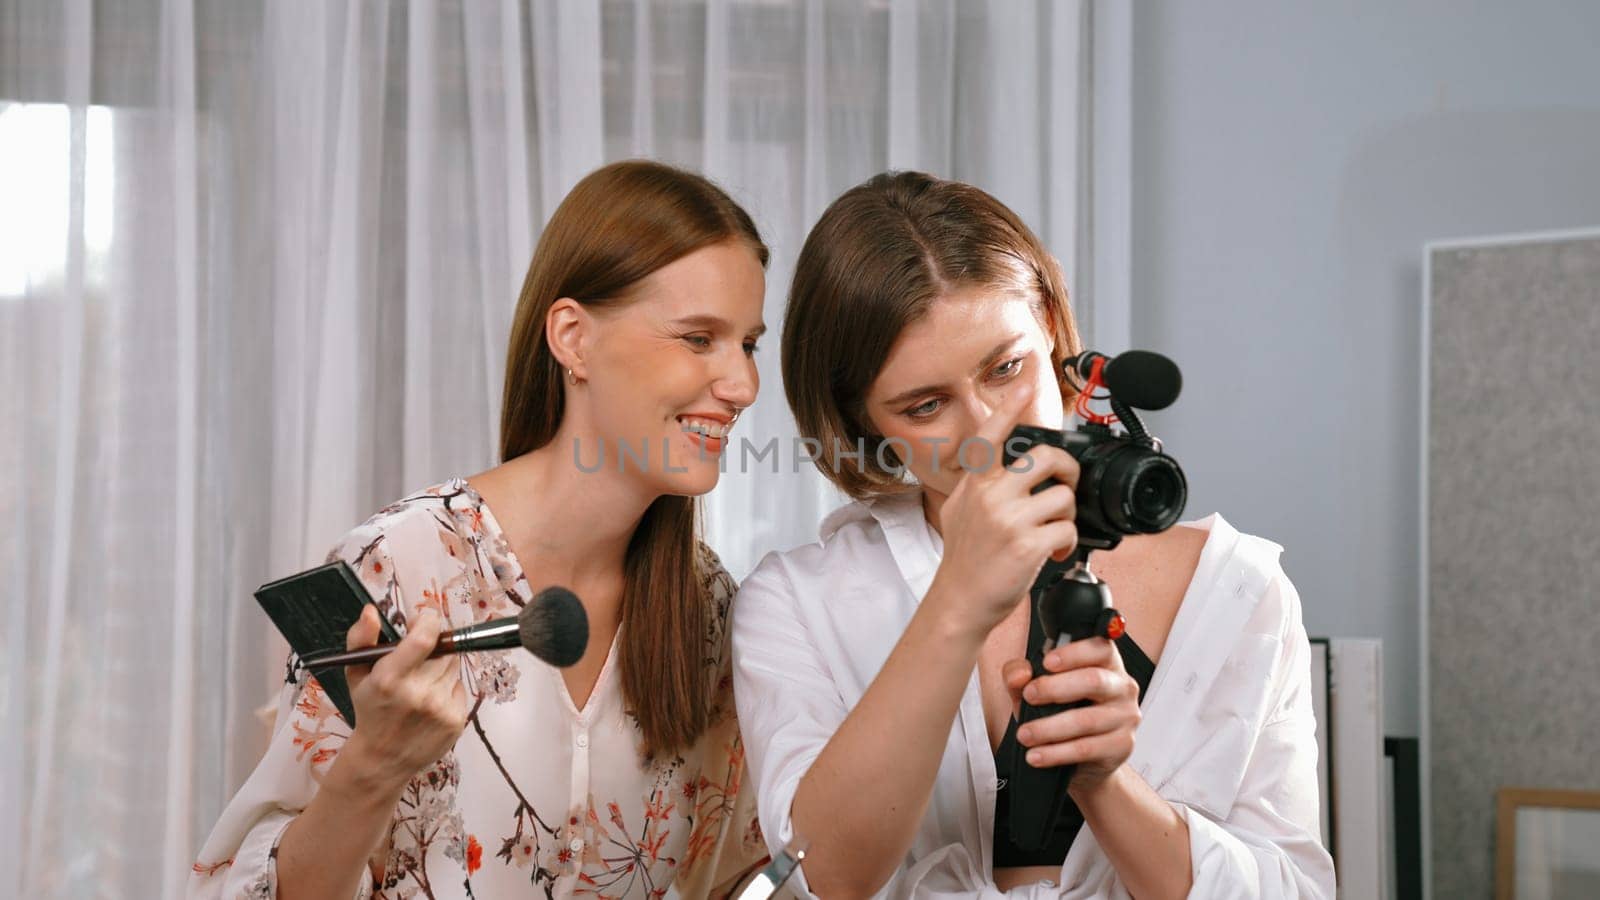 Two influencer partner shoot live streaming vlog video review makeup prim social media or blog. Happy young girl with cosmetics studio lighting for marketing recording session broadcasting online.